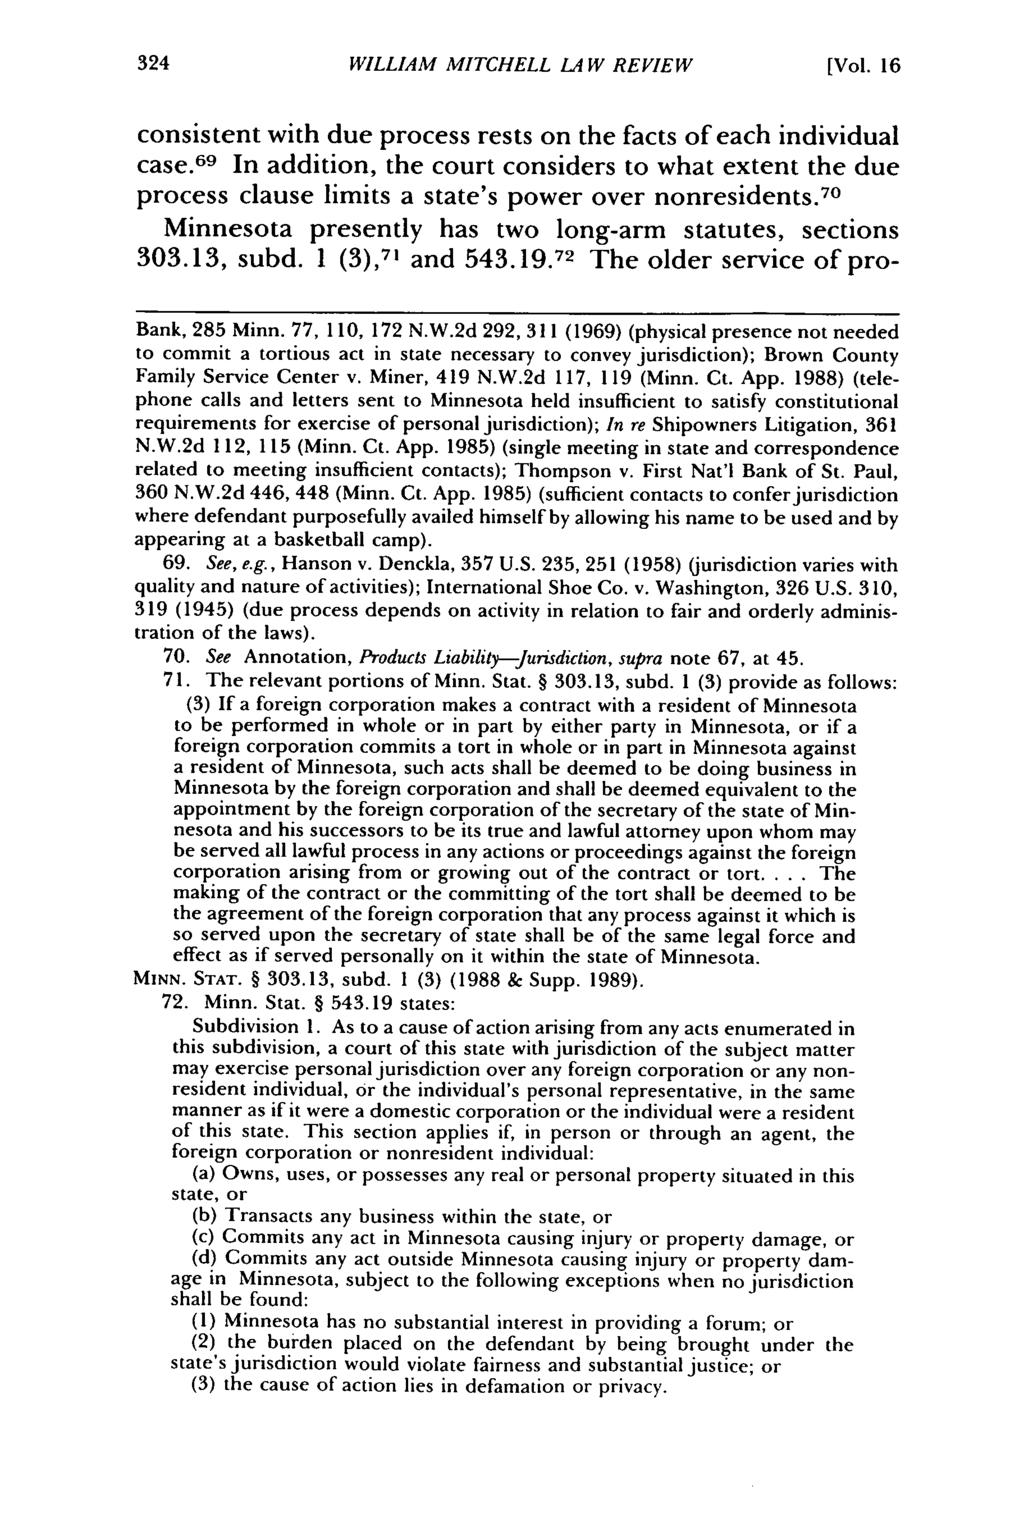 William WILLIAM Mitchell Law MITCHELL Review, Vol. 16, LA Iss. W 1 REVIEW [1990], Art. 7 [Vol. 16 consistent with due process rests on the facts of each individual case.